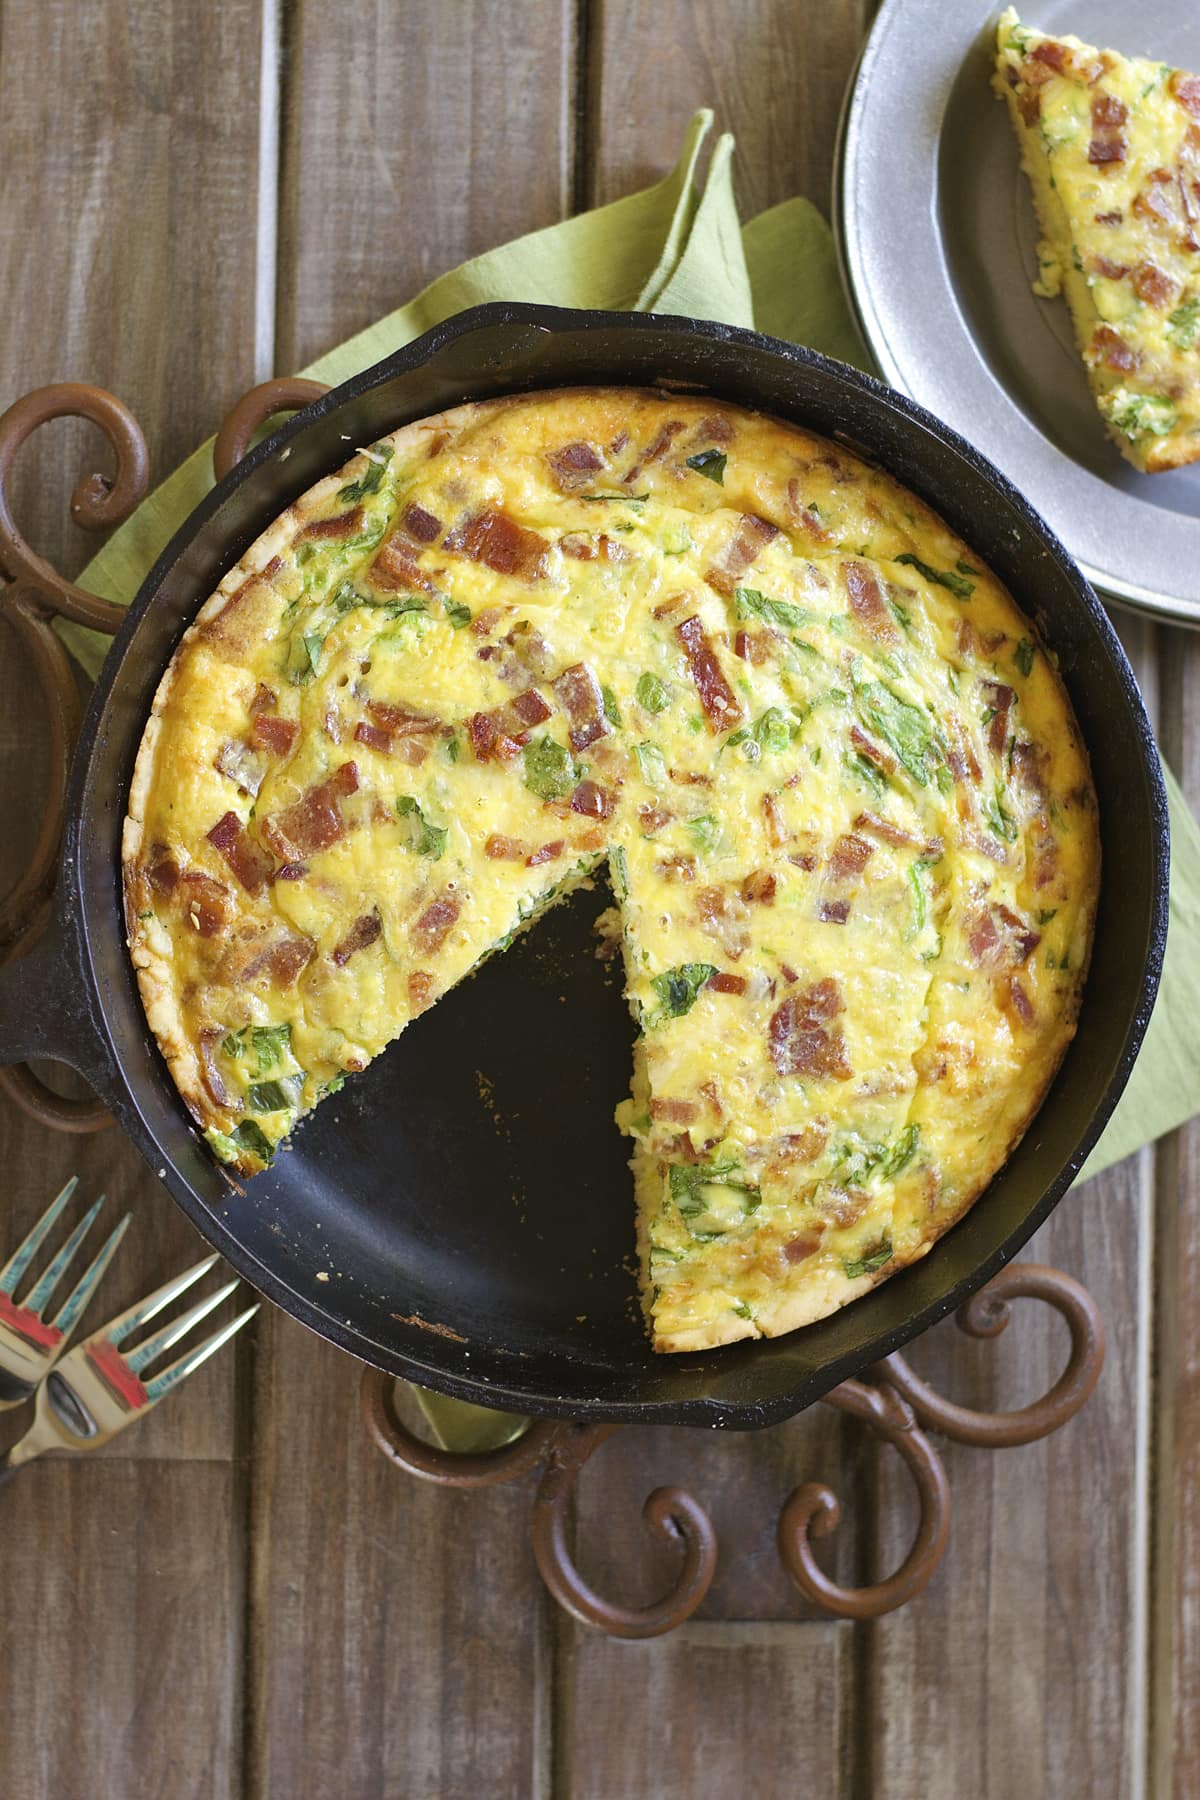 This Bacon Jalapeño Gouda and Spinach Quiche is an easy hearty dish your family will love! Loaded with crispy bacon, fresh jalapeño, shredded gouda and chopped spinach this will become a fast favorite!